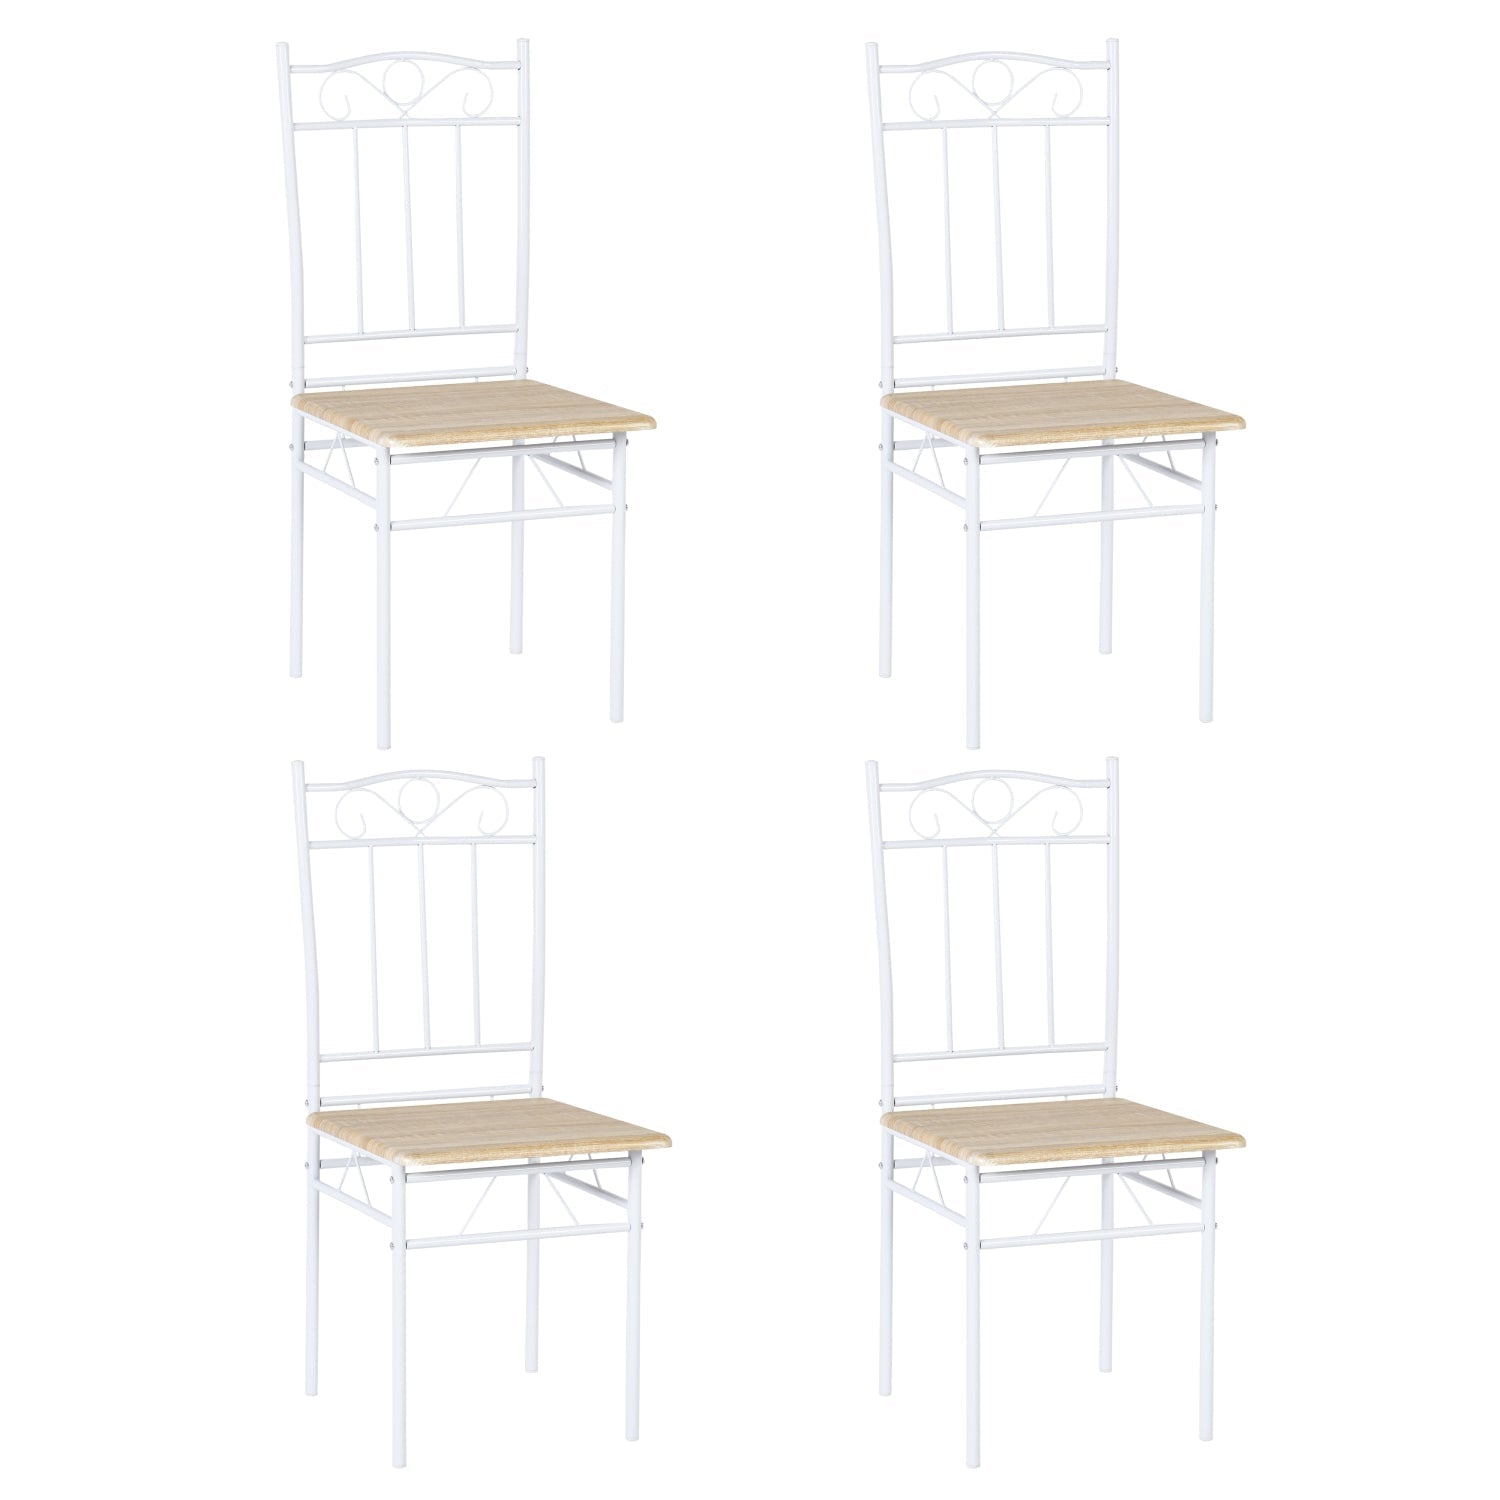 NORSEMAN BEECH Dining Table with 4/6 Chairs - 137*77*75cm - Oak Grain & White Iron Tubing